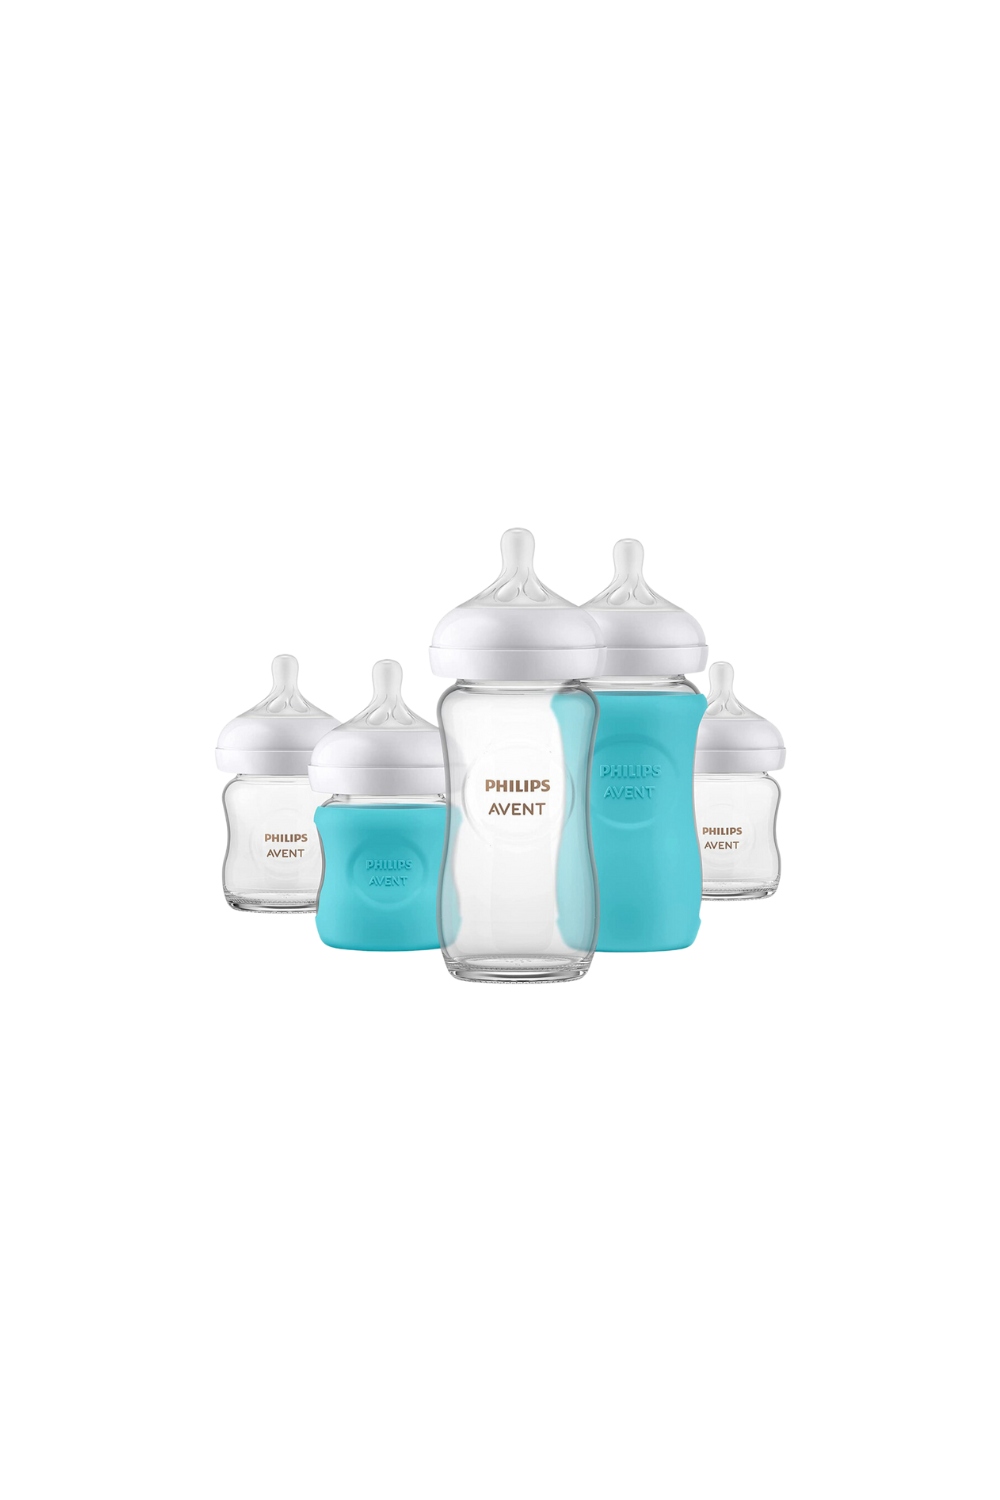 newborn items you need, items for infants, essentials newborn, newborn list essentials, things for infants, list newborn essentials, newborn essentials